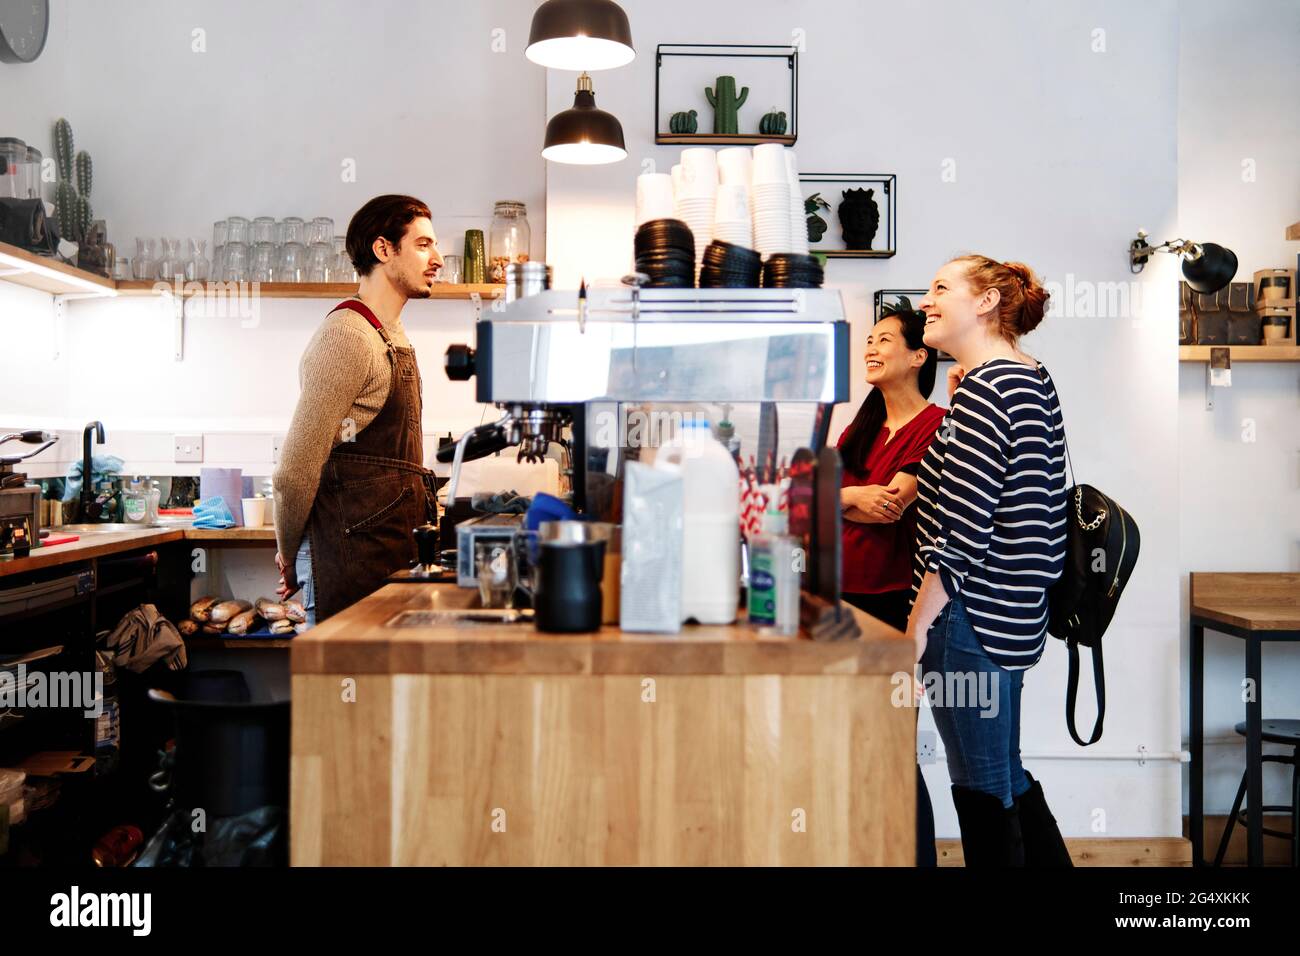 Smiling female customers looking at pendant light while standing in front of owner at coffee shop counter Stock Photo